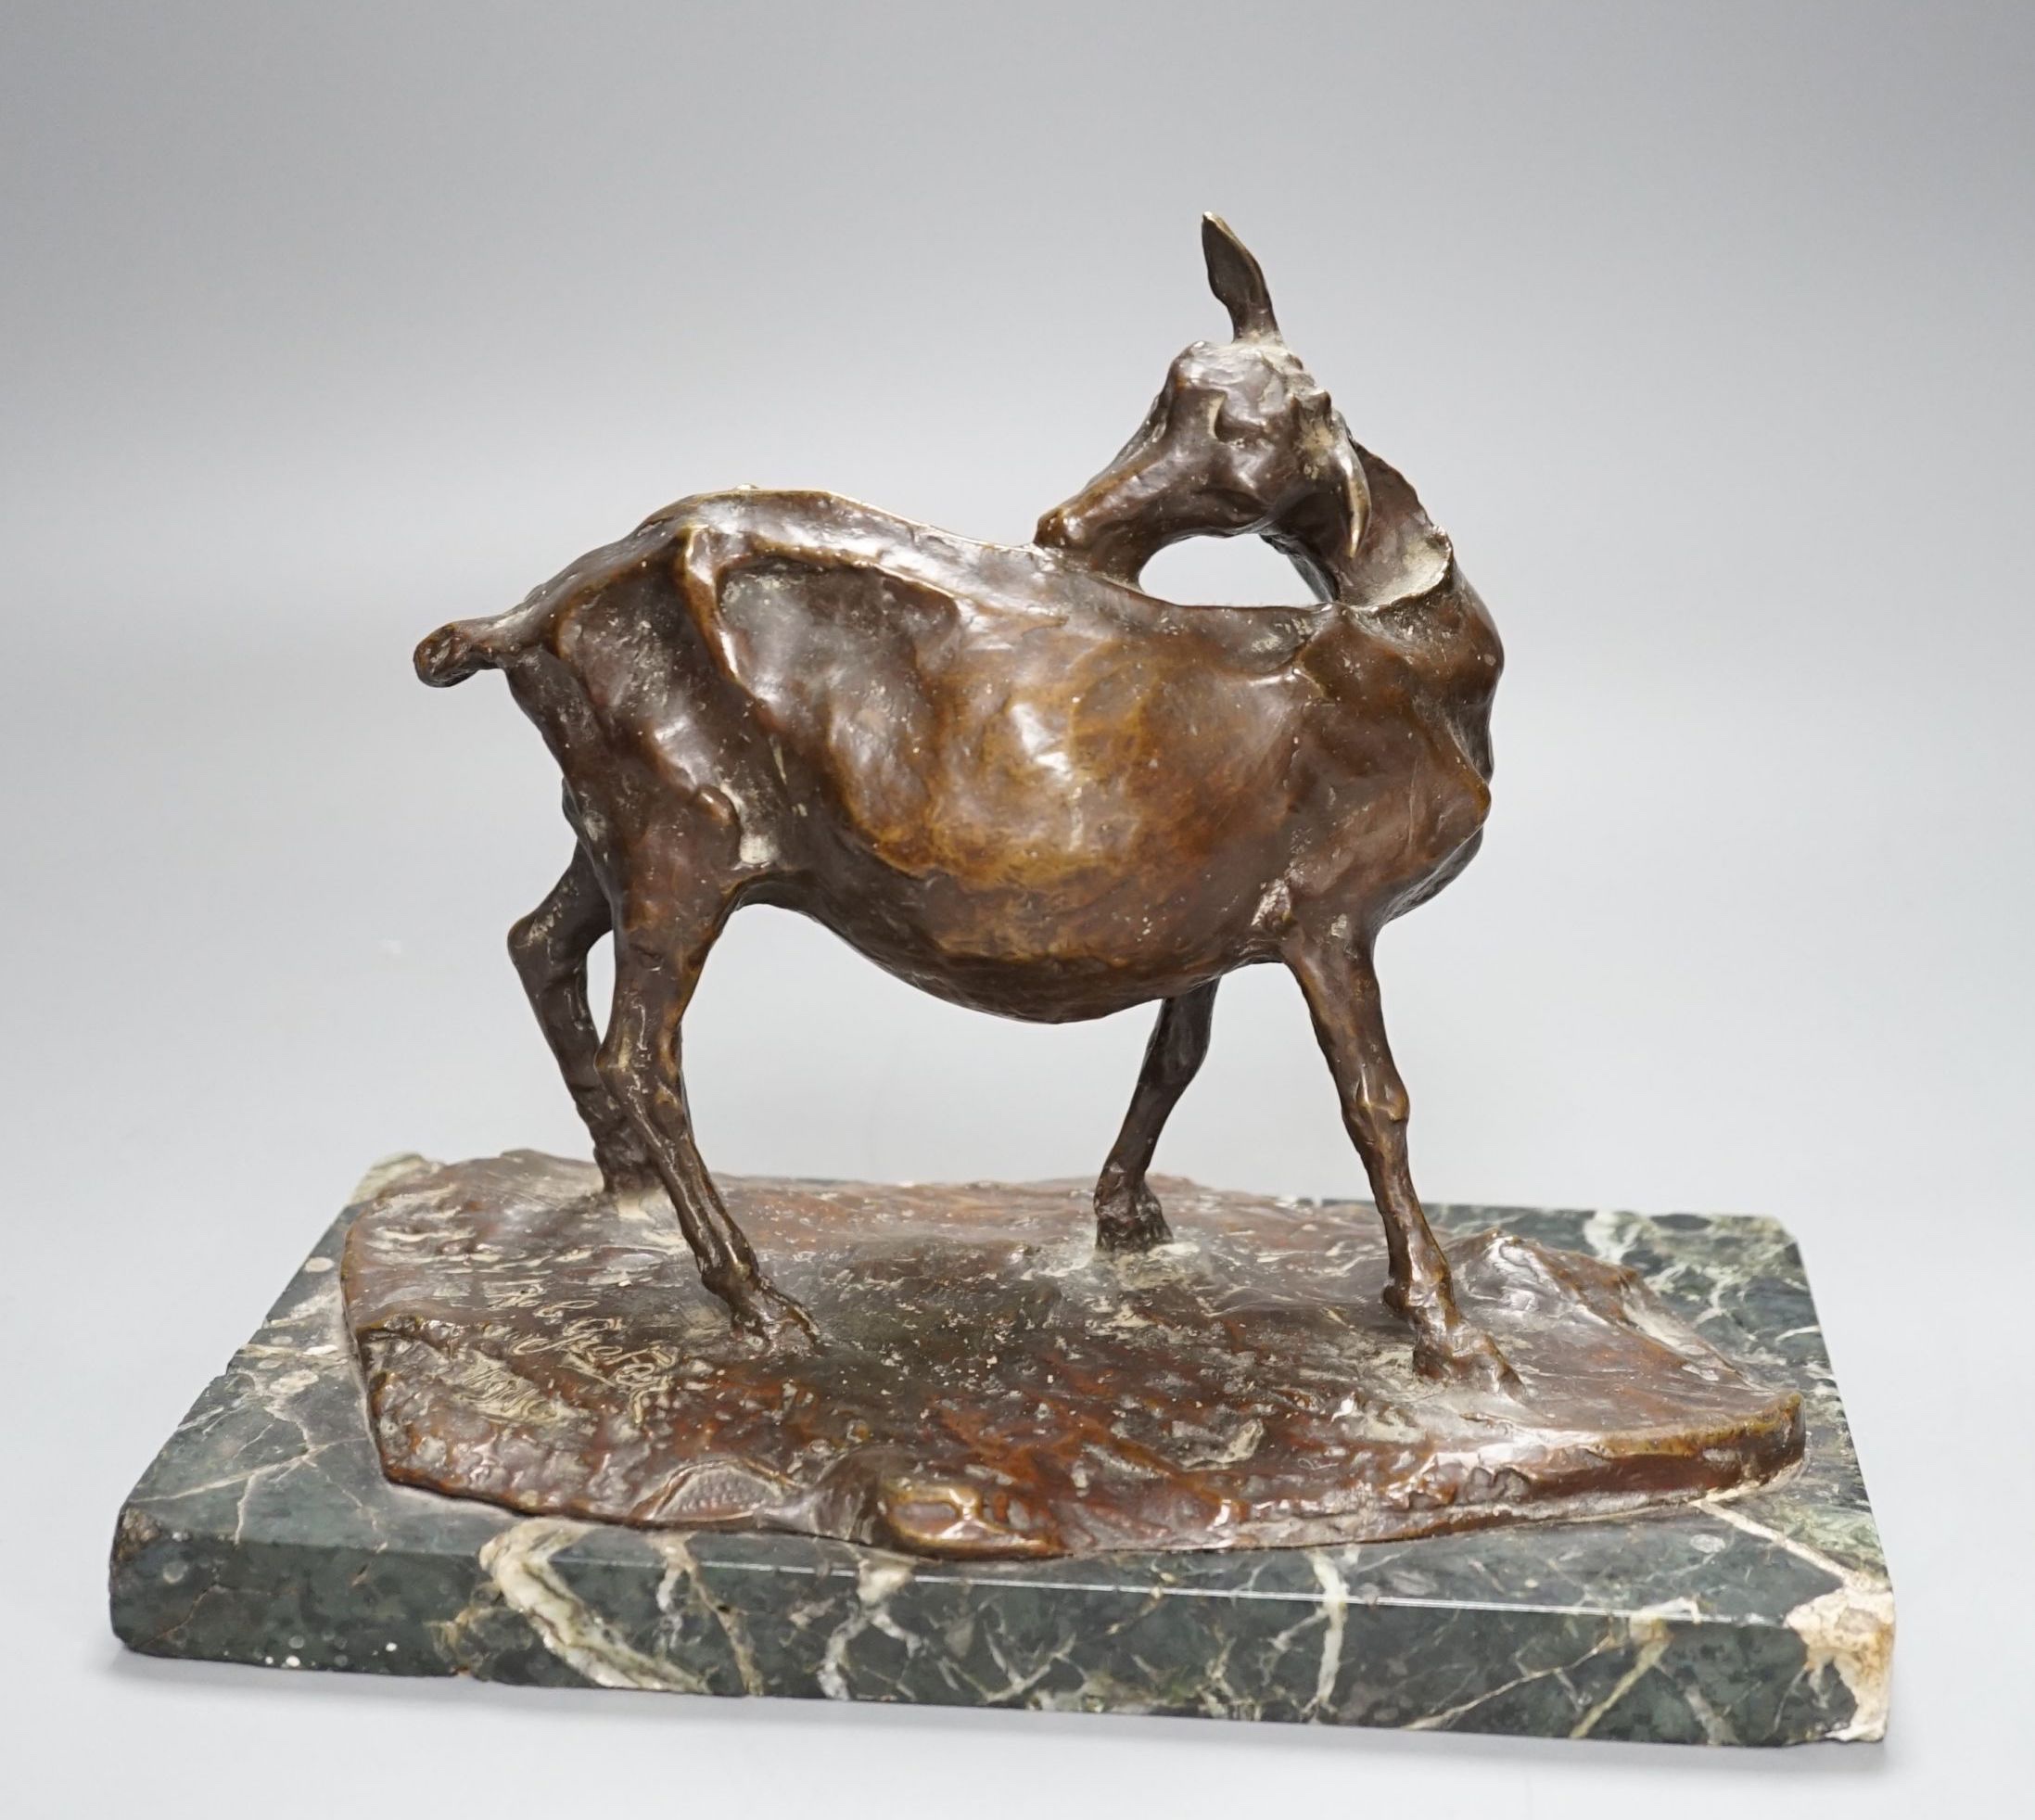 A bronze sculpture depicting a goat, on marbled base by Robert Greter, dated 1910 - 20cm high